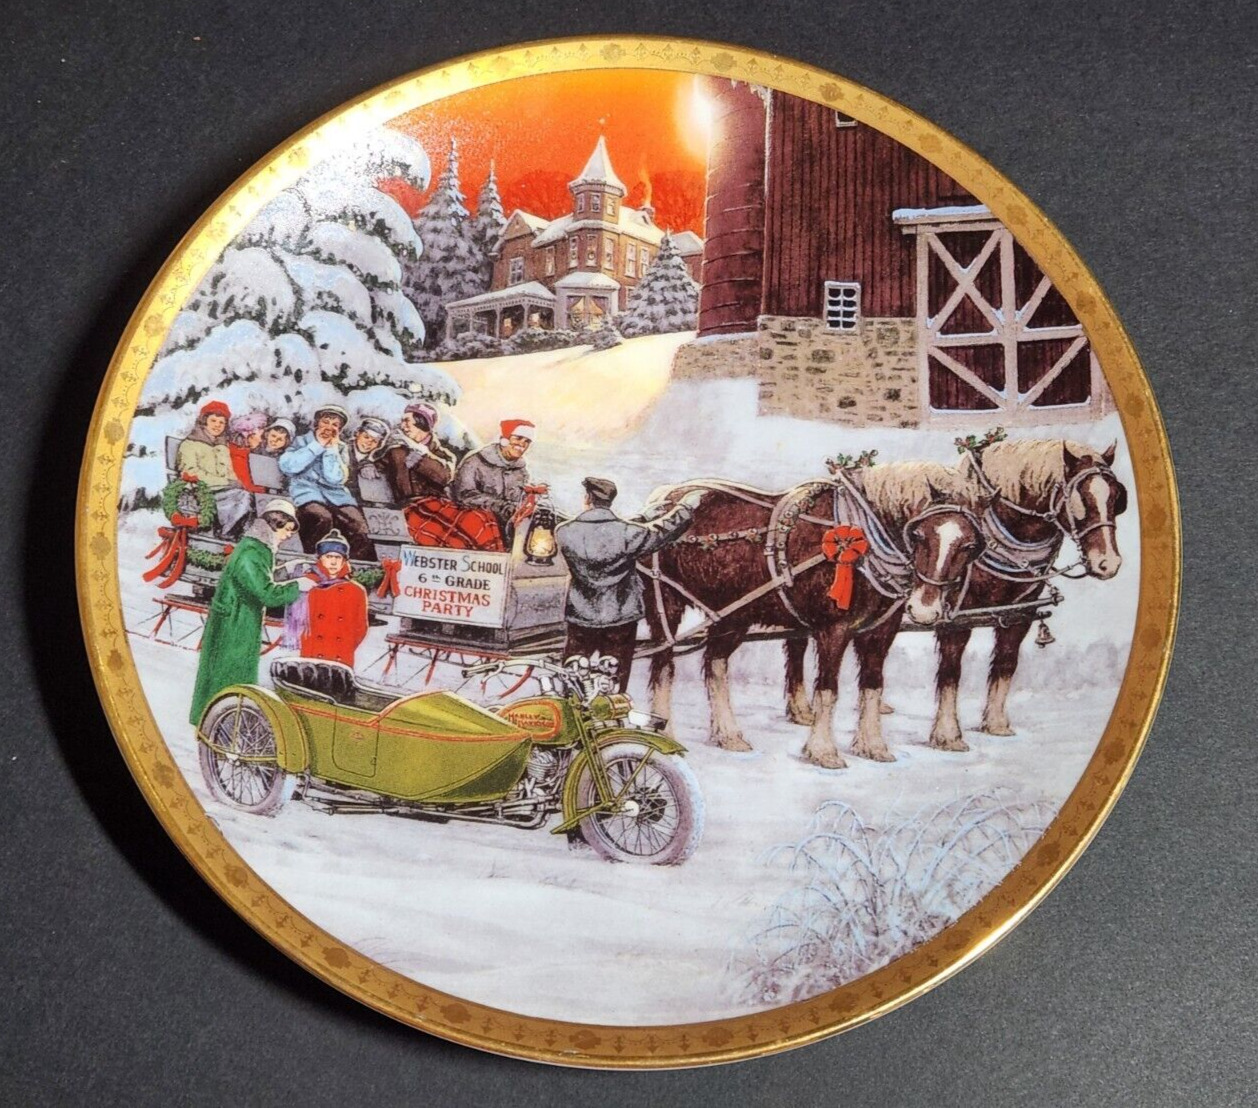 Harley Davidson 1995 Collector Plate Holiday Memories “Late Arrival” 2nd Ltd Ed